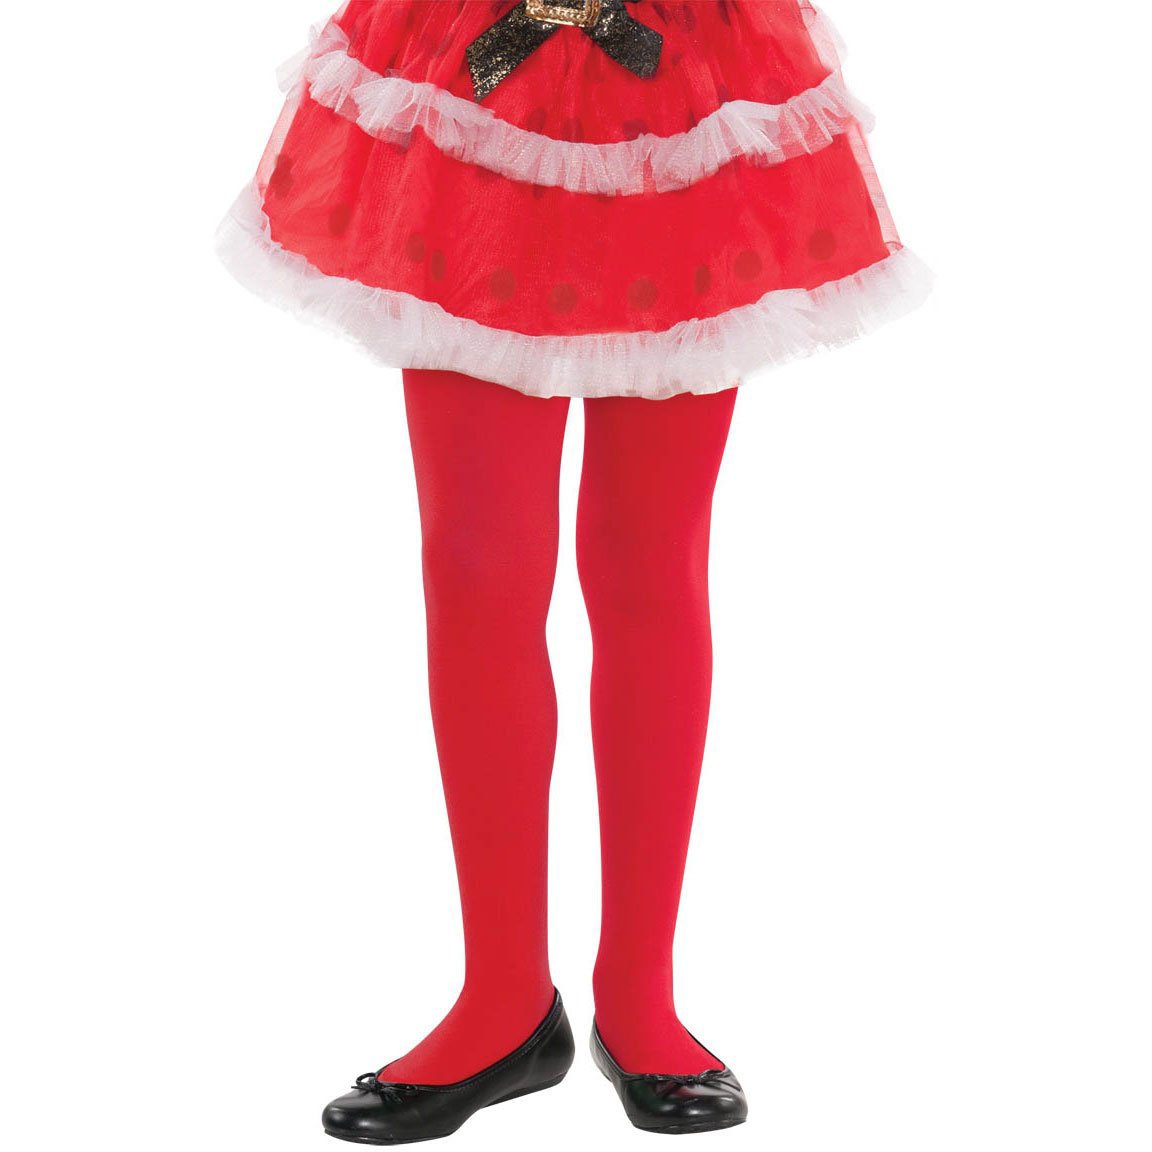 Red Tights Costumes & Apparel - Party Centre